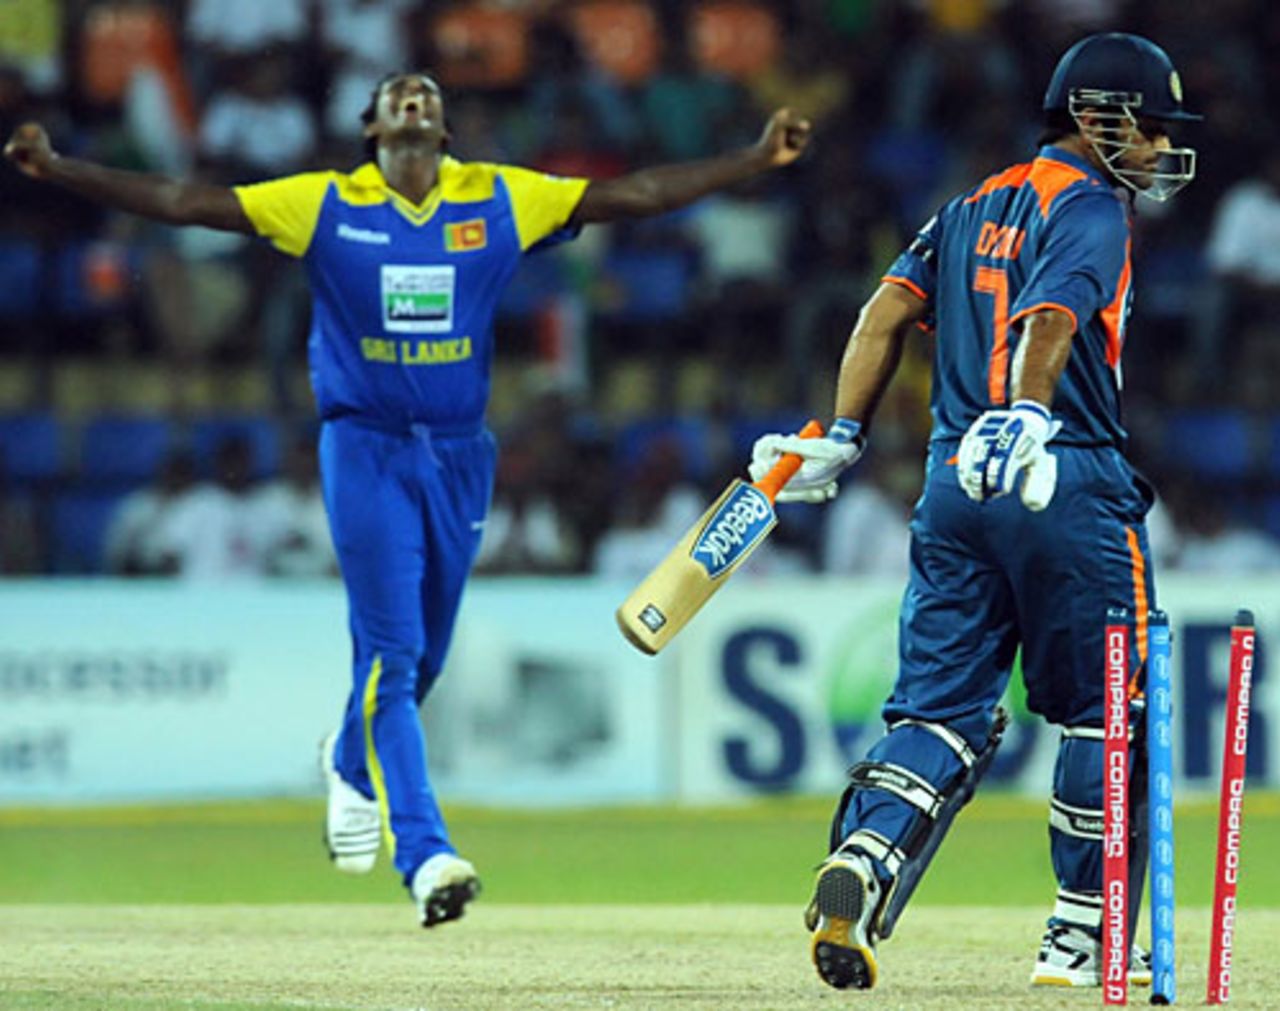 Angelo Mathews bowled MS Dhoni for 8, Sri Lanka v India, Compaq Cup, 3rd match, Colombo, September 12, 2009